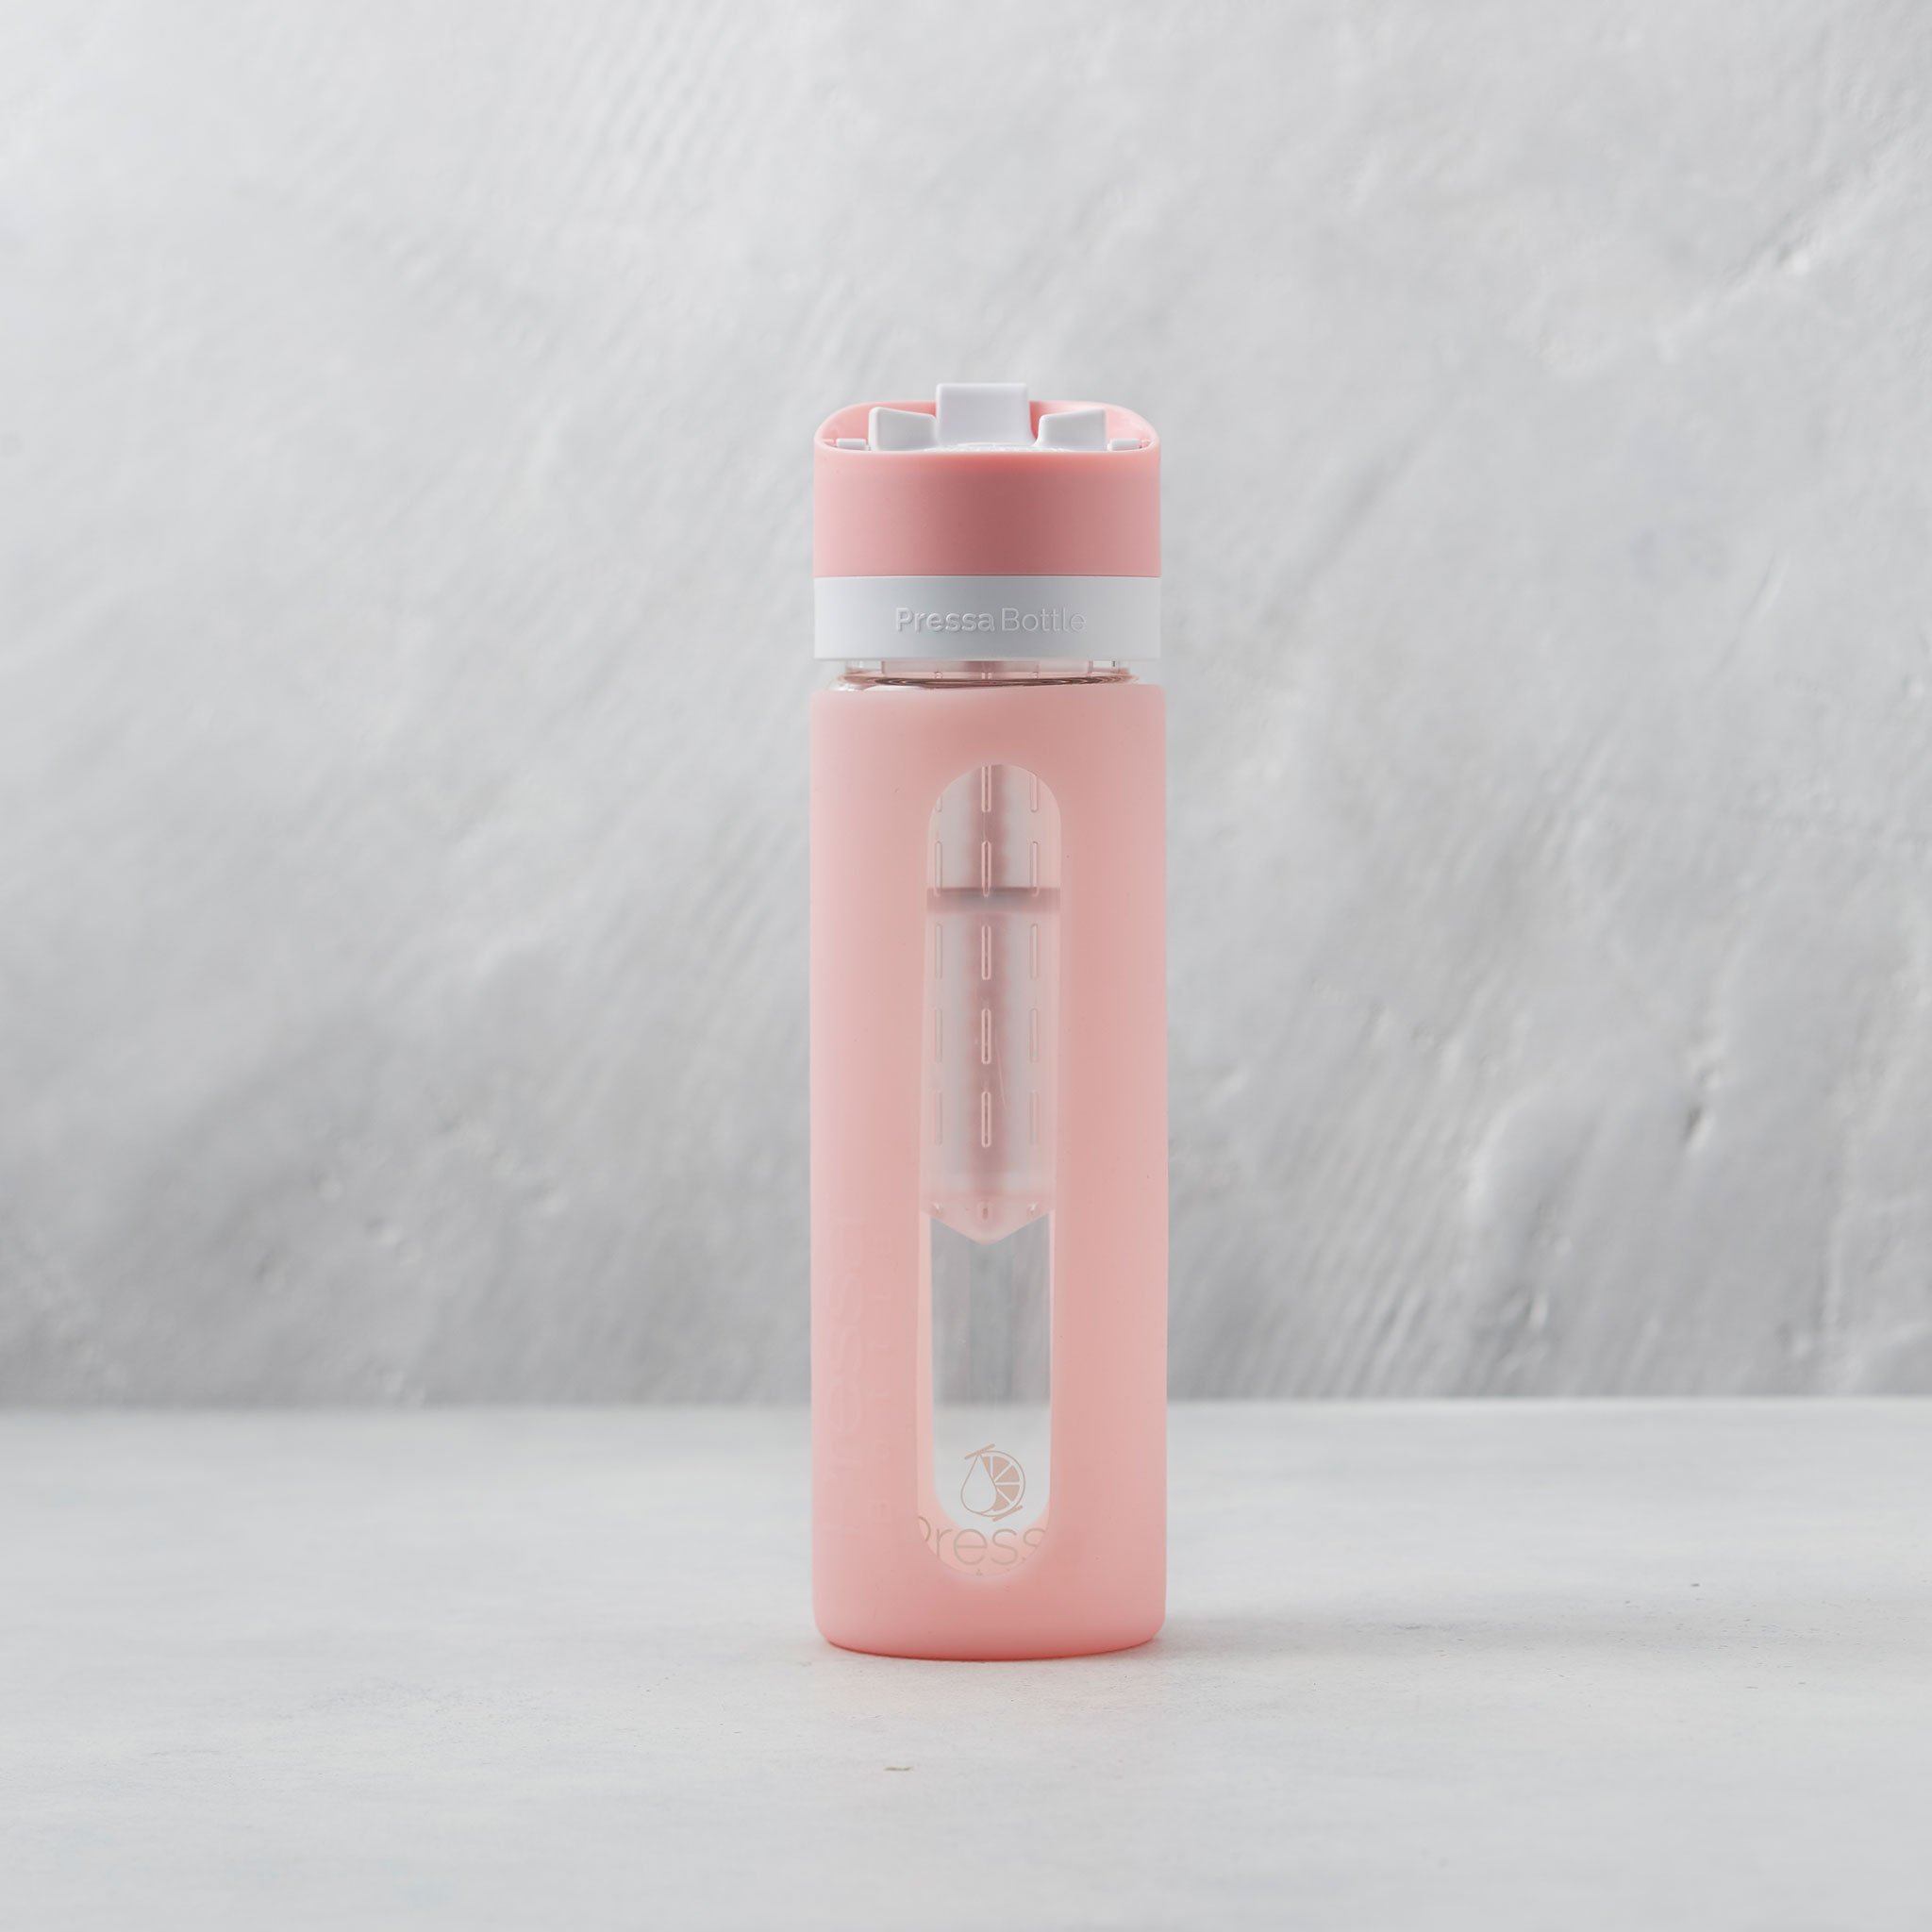 infuser water bottles pink pressa bottle on a white table 